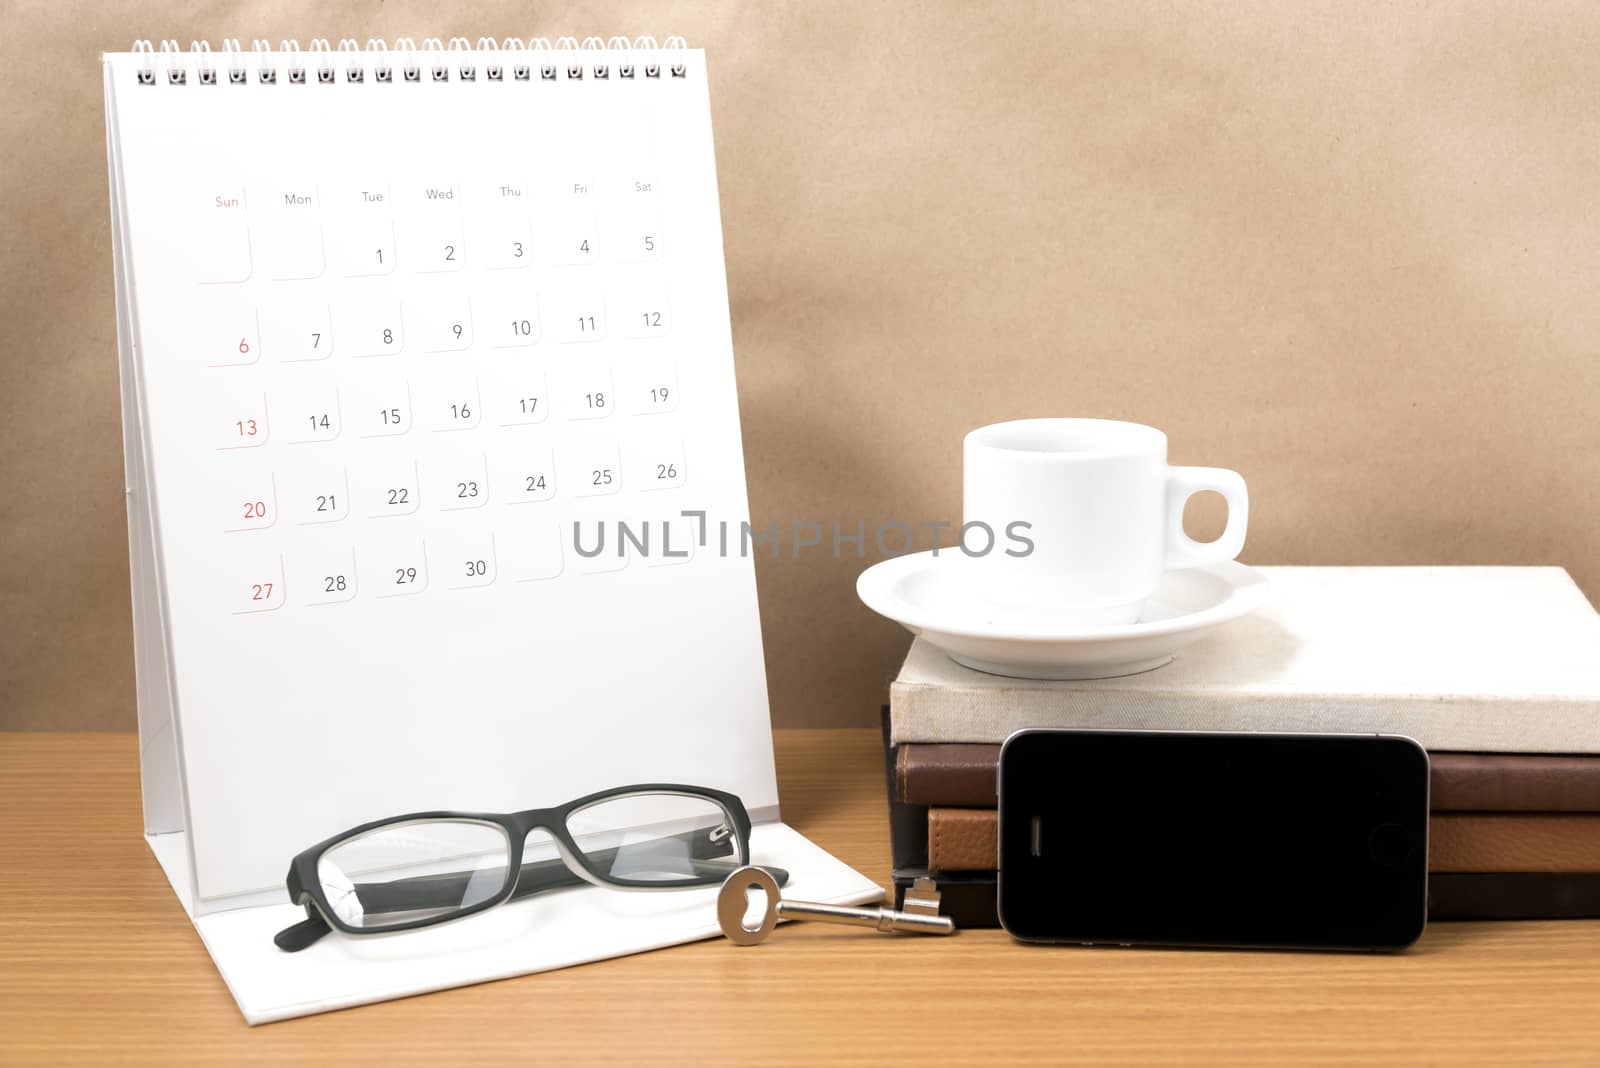 coffee and phone with key,eyeglasses,stack of book,calendar by ammza12